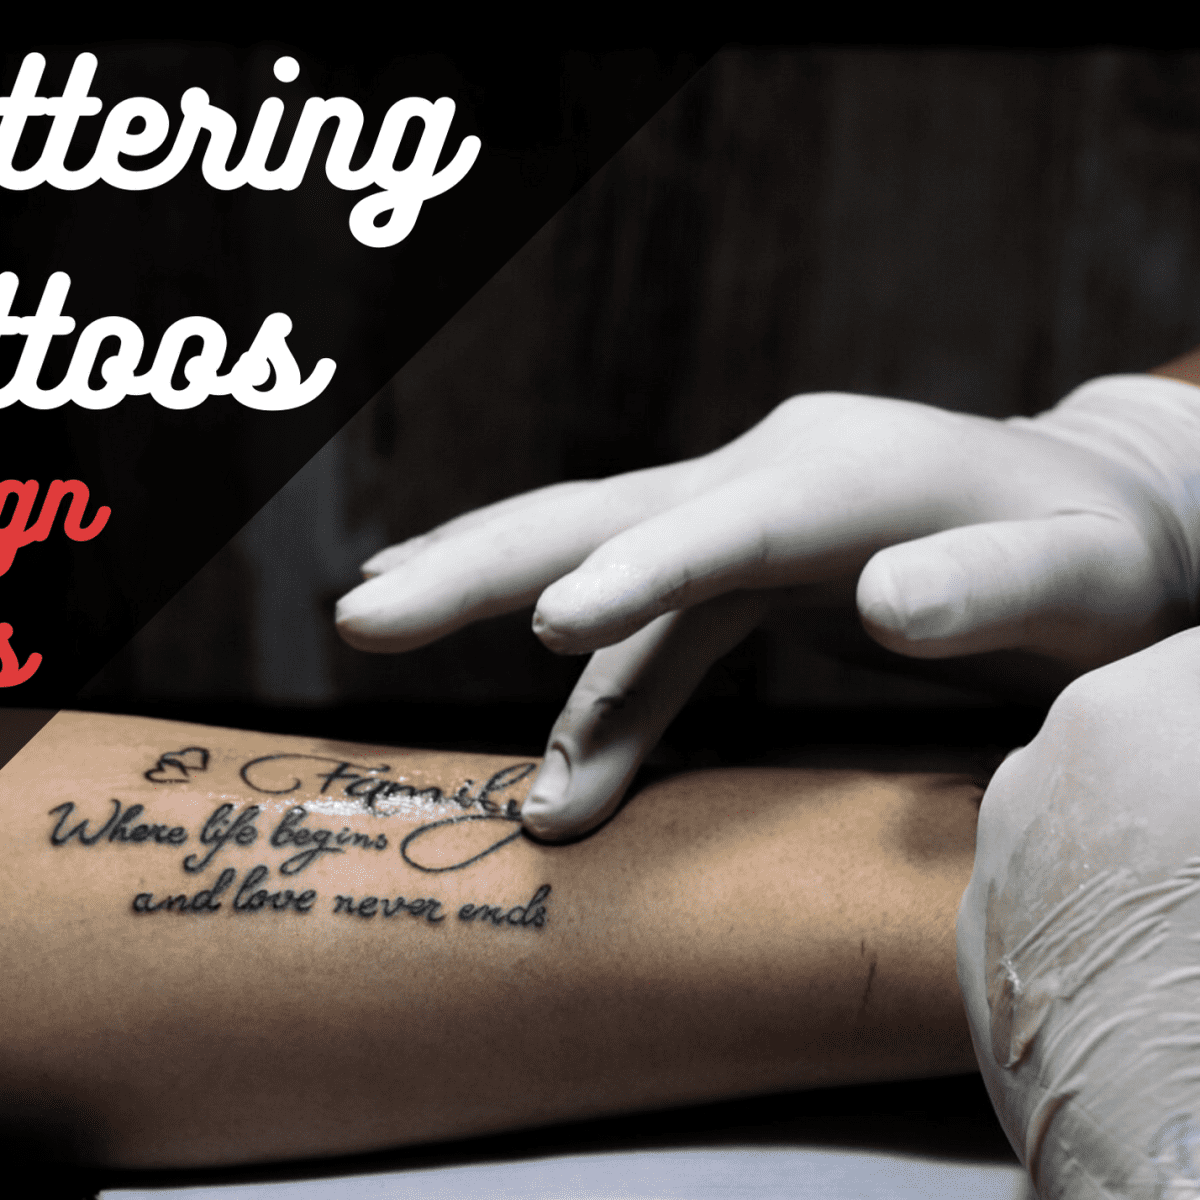 Lettering Tattoo Ideas, Pictures, and Designs - TatRing